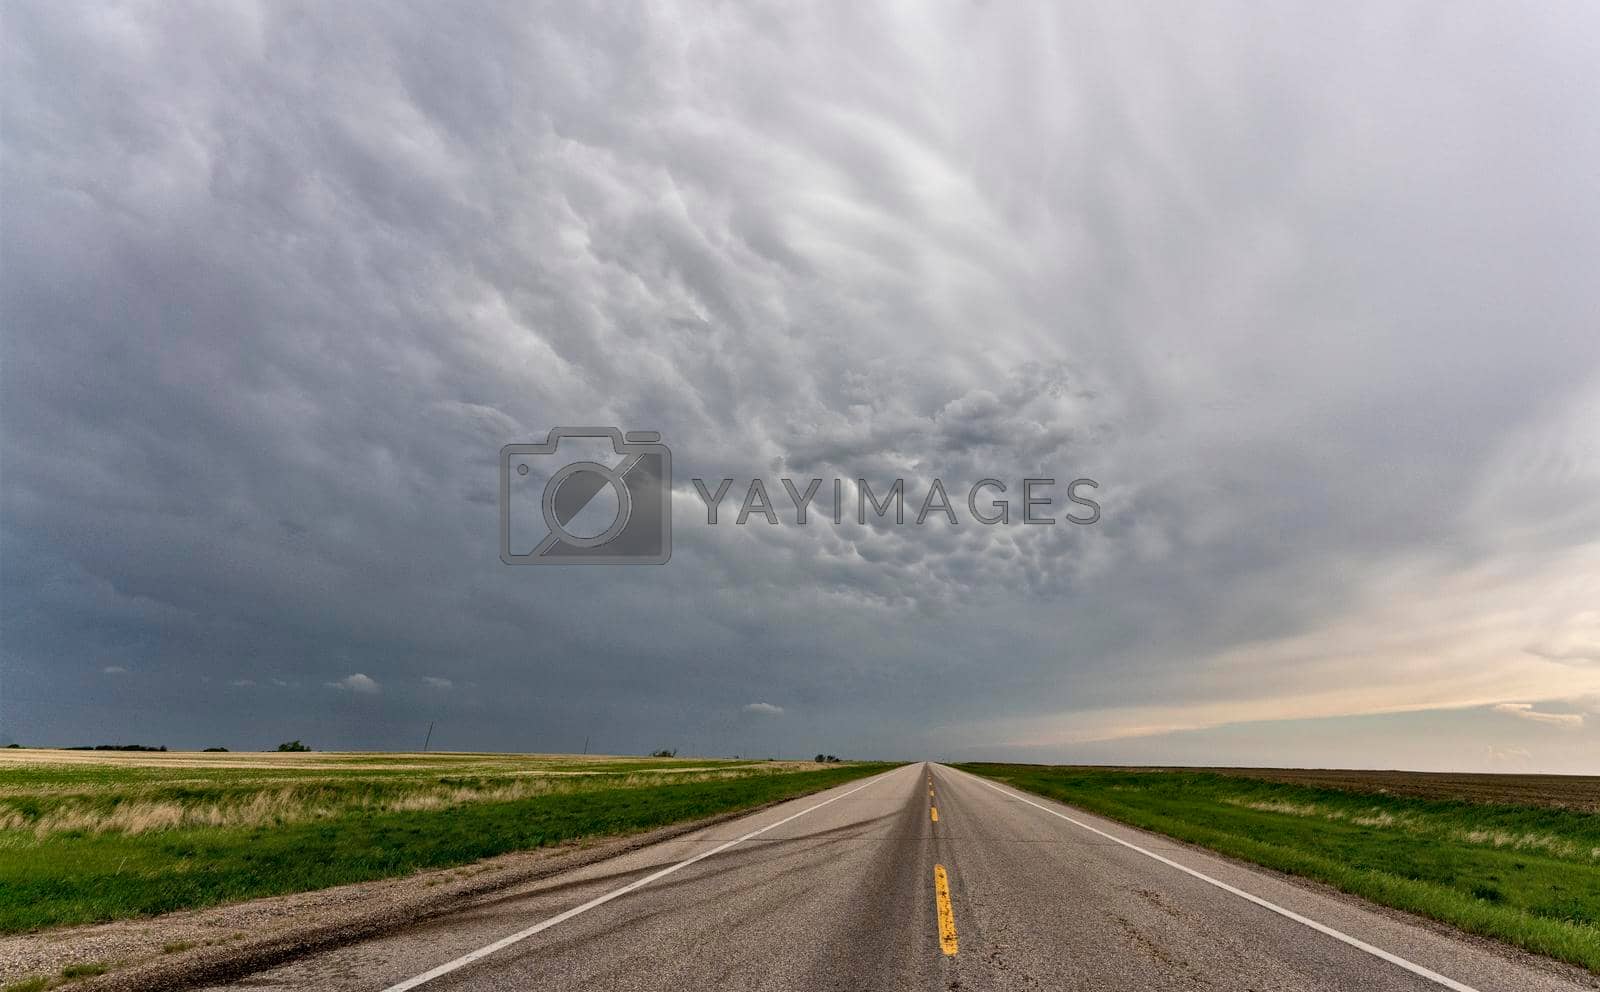 Royalty free image of Prairie Storm Clouds by pictureguy